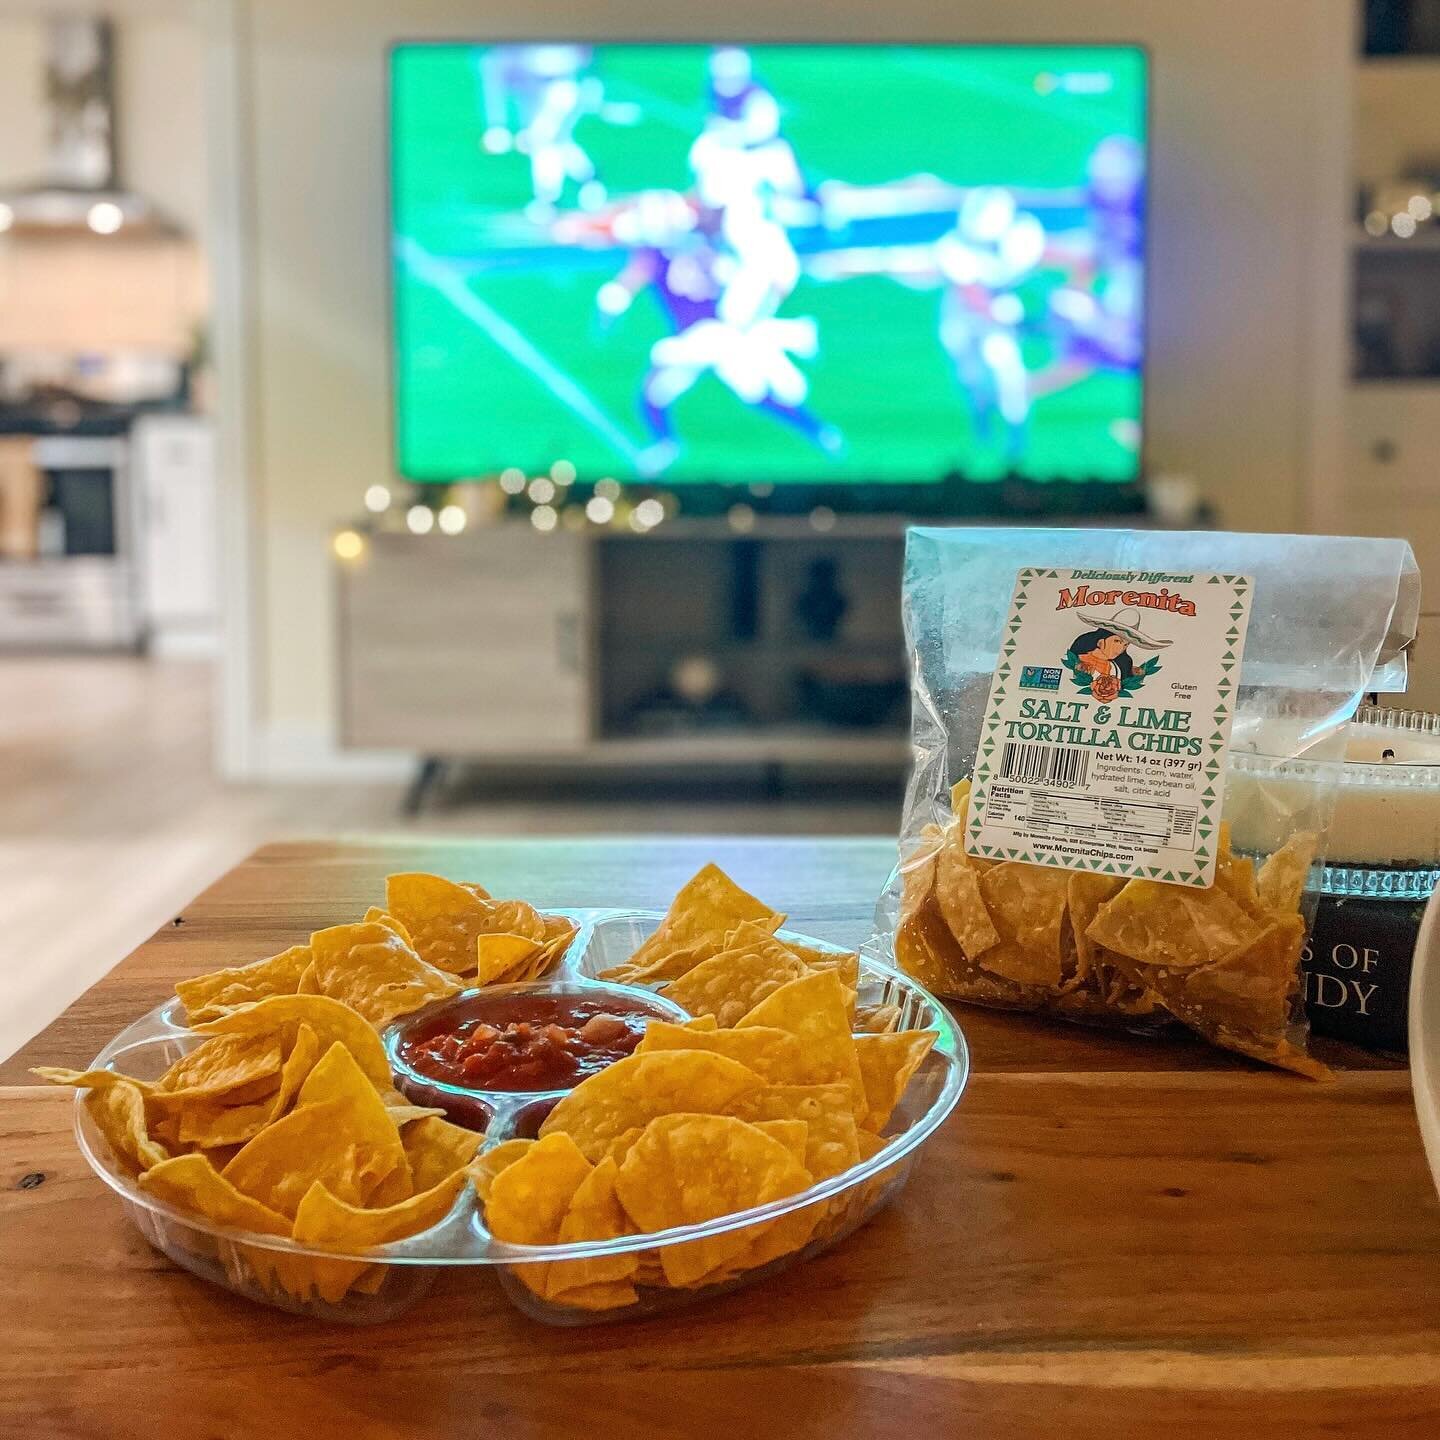 Score big on flavor this Sunday game day! 🏈🔥 Grab a bag of Morenita Tortilla Chips, dip into the salsa playbook, and let the taste touchdown celebrations begin.
.⁣
.⁣
.⁣
#MorenitaFoods #tortillachips #sundayfunday #snacks #foodies #chips #footballs